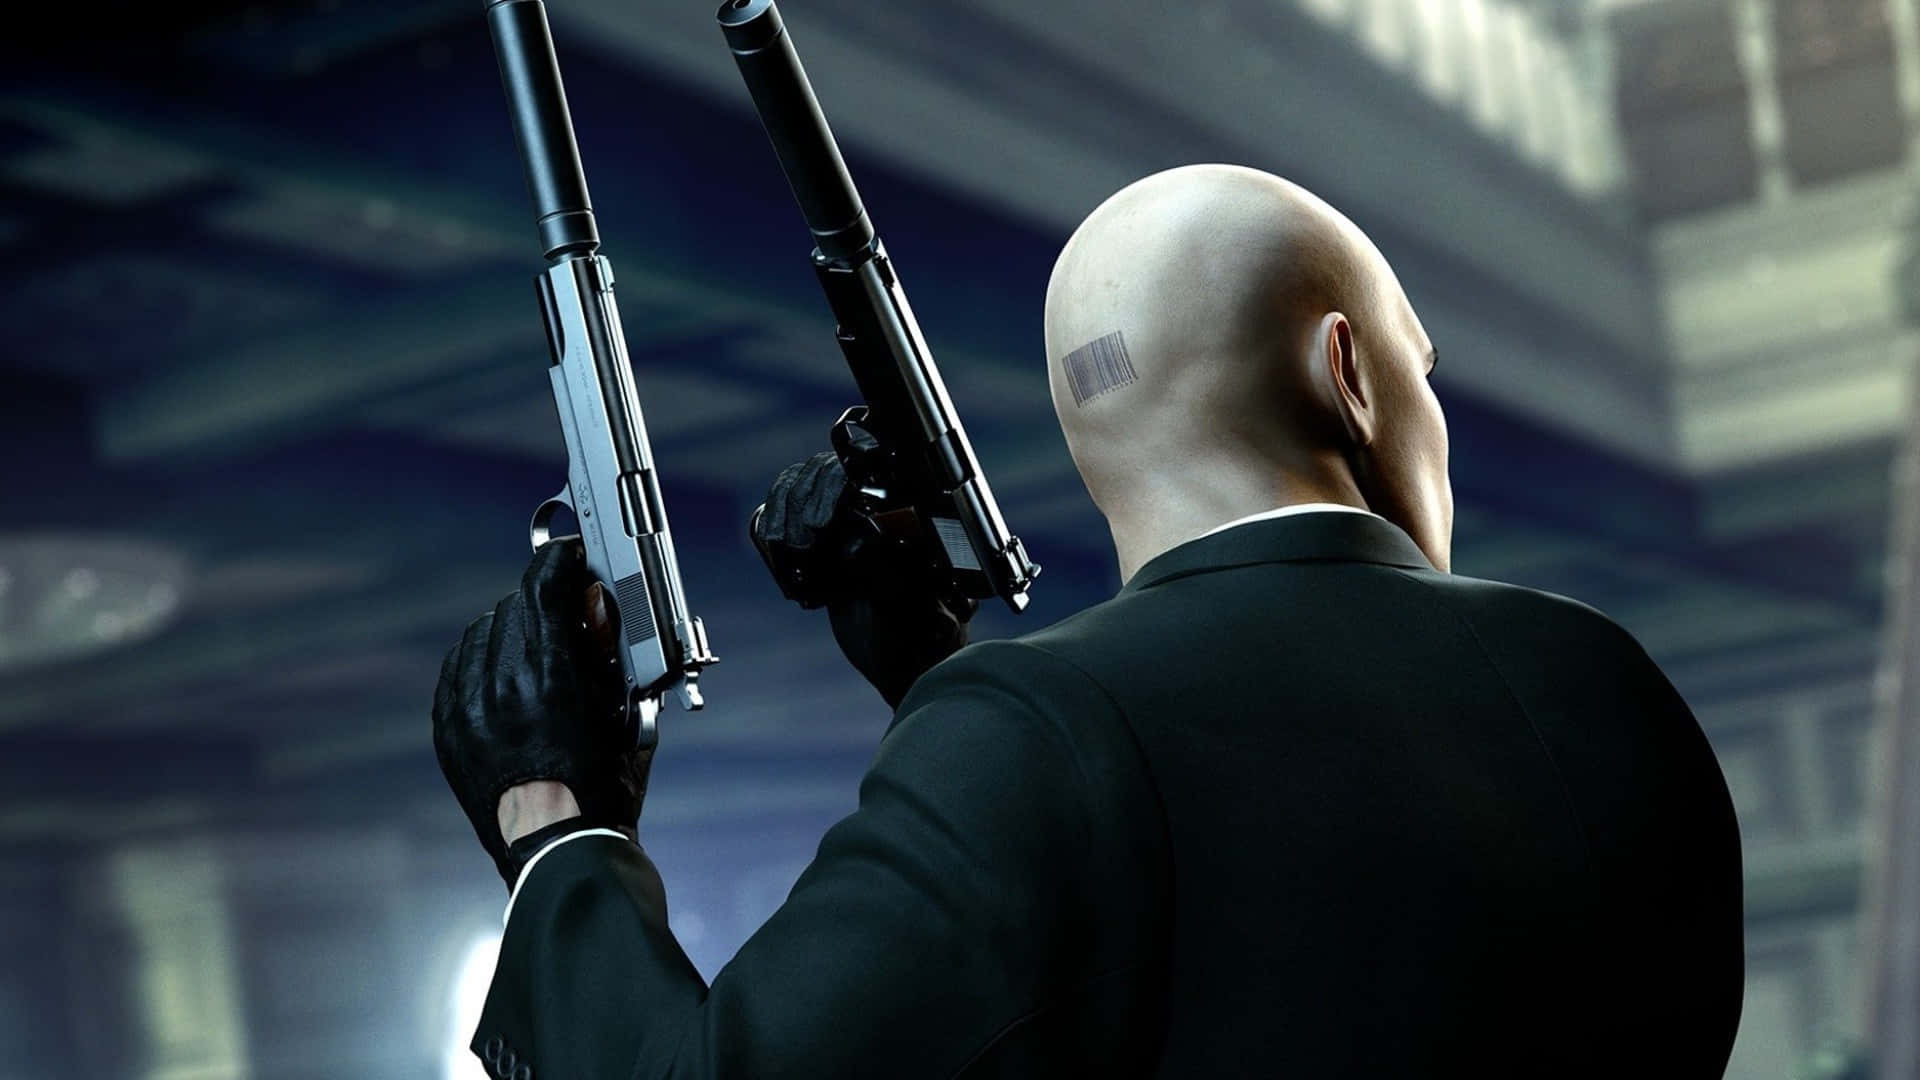 Hitman Absolution - Become the Perfect Assassin